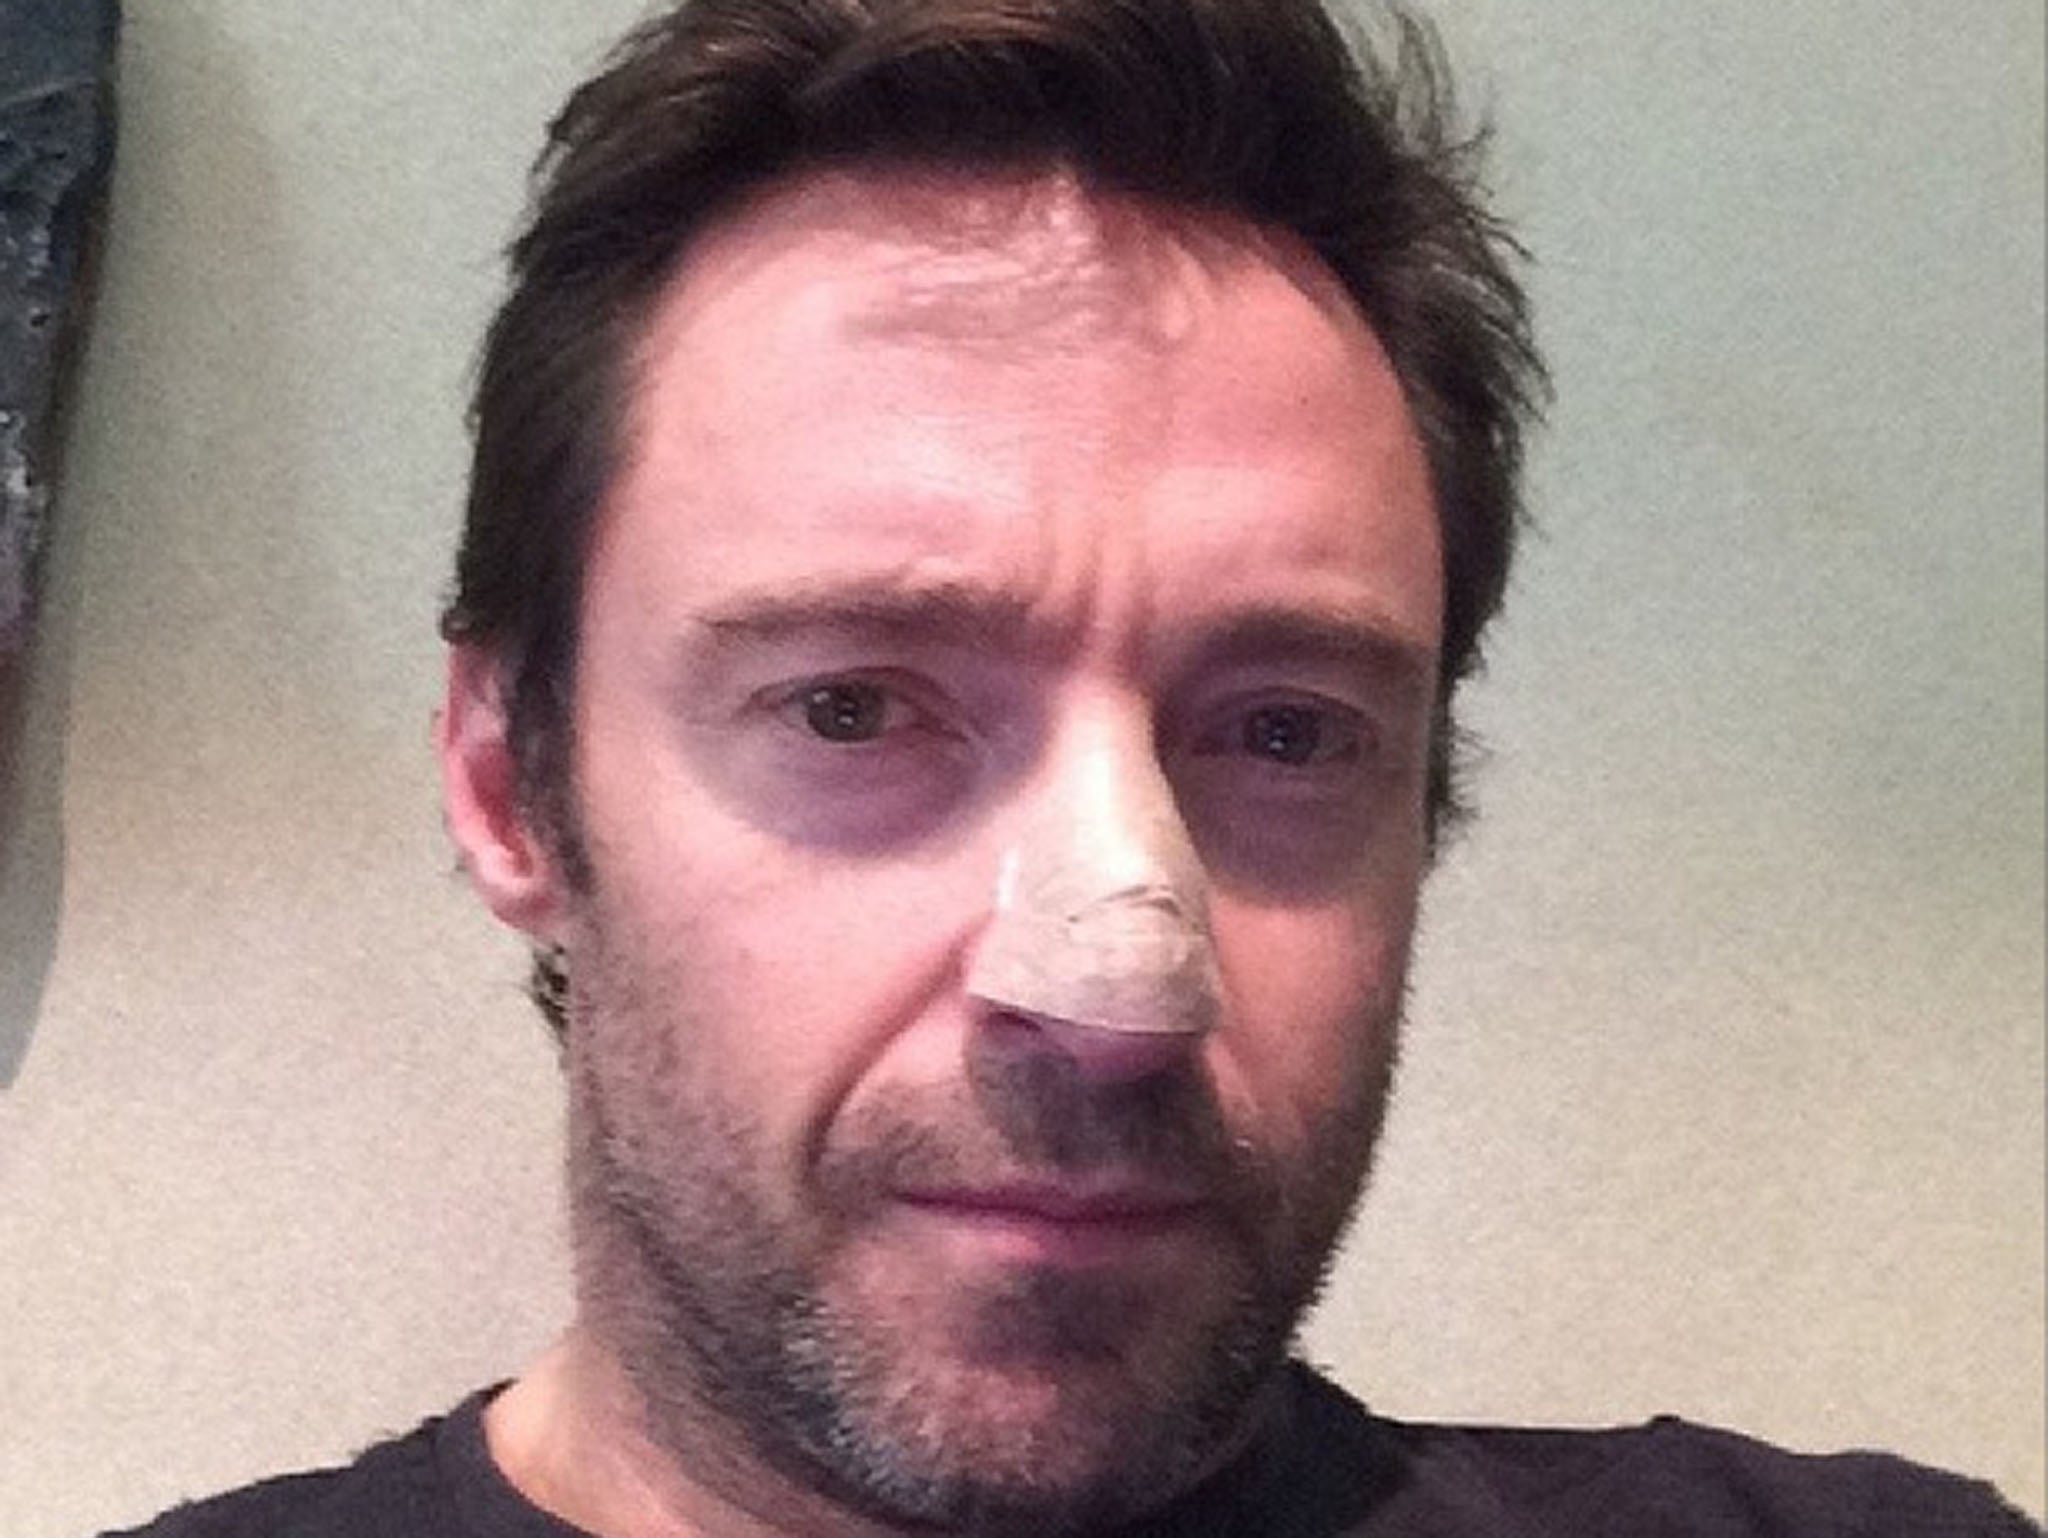 Actor Hugh Jackman has warned fans to check unusual marks for skin cancer